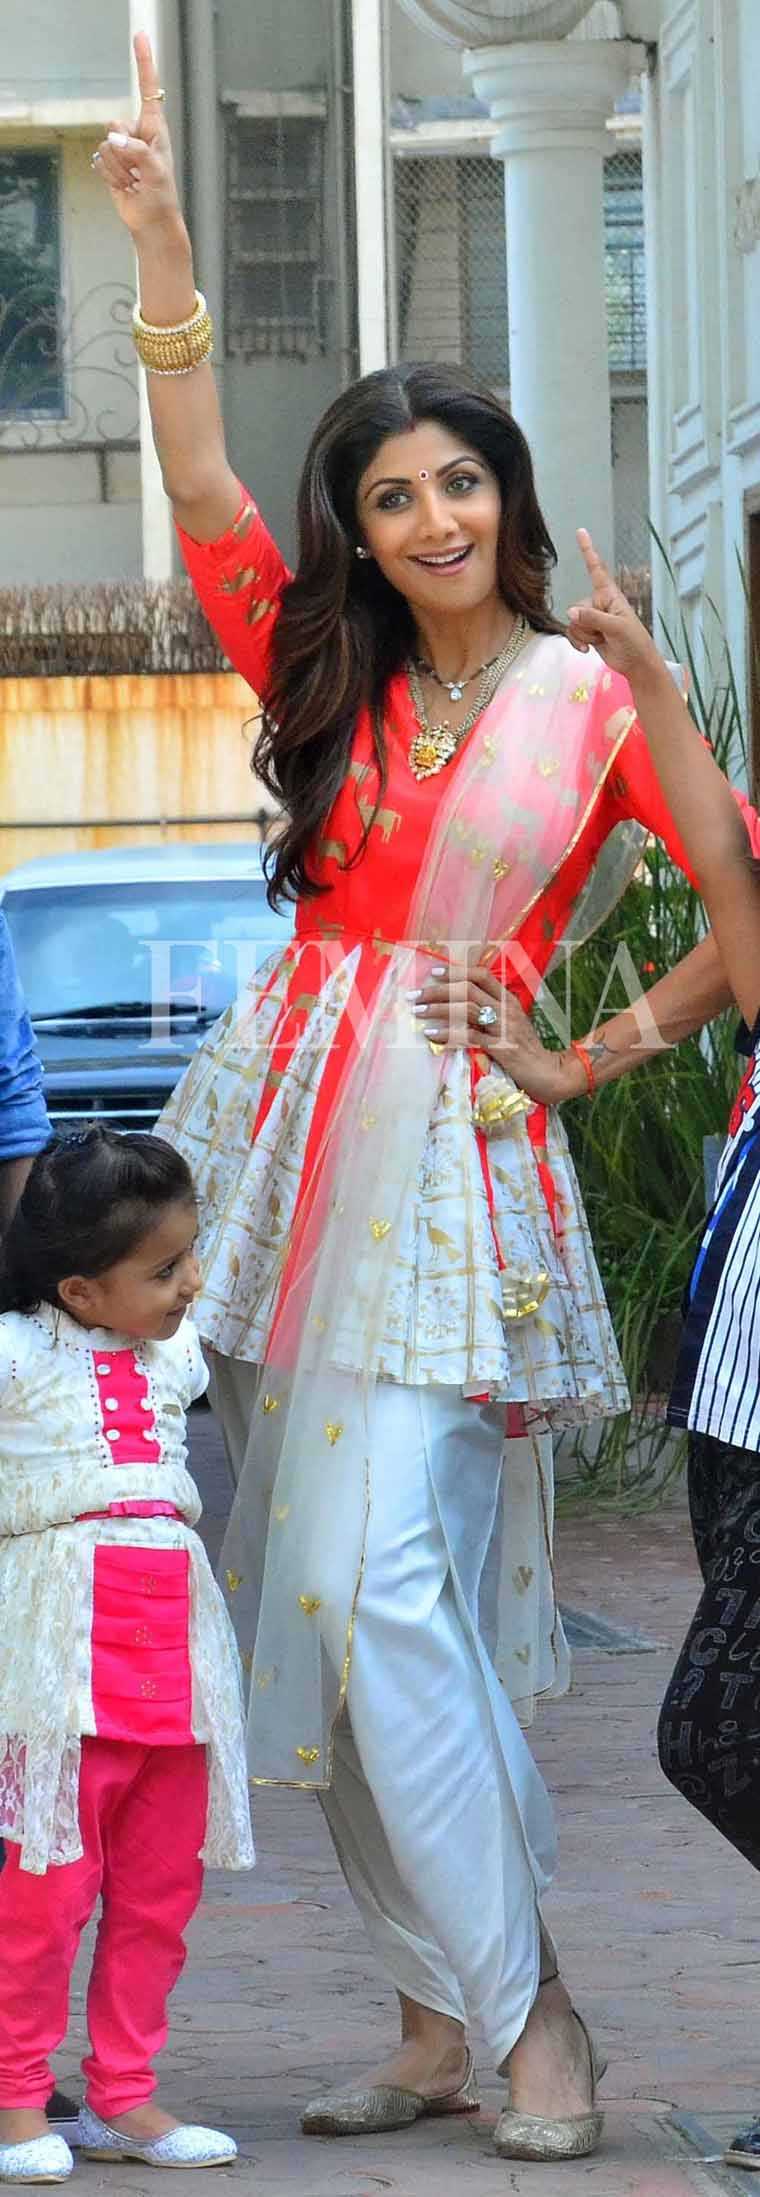 SHILPA SHETTY: Shilpa had some fun with her festive outfit by opting for a hot-pink and white Masaba kedia-style top paired with dhoti trousers.